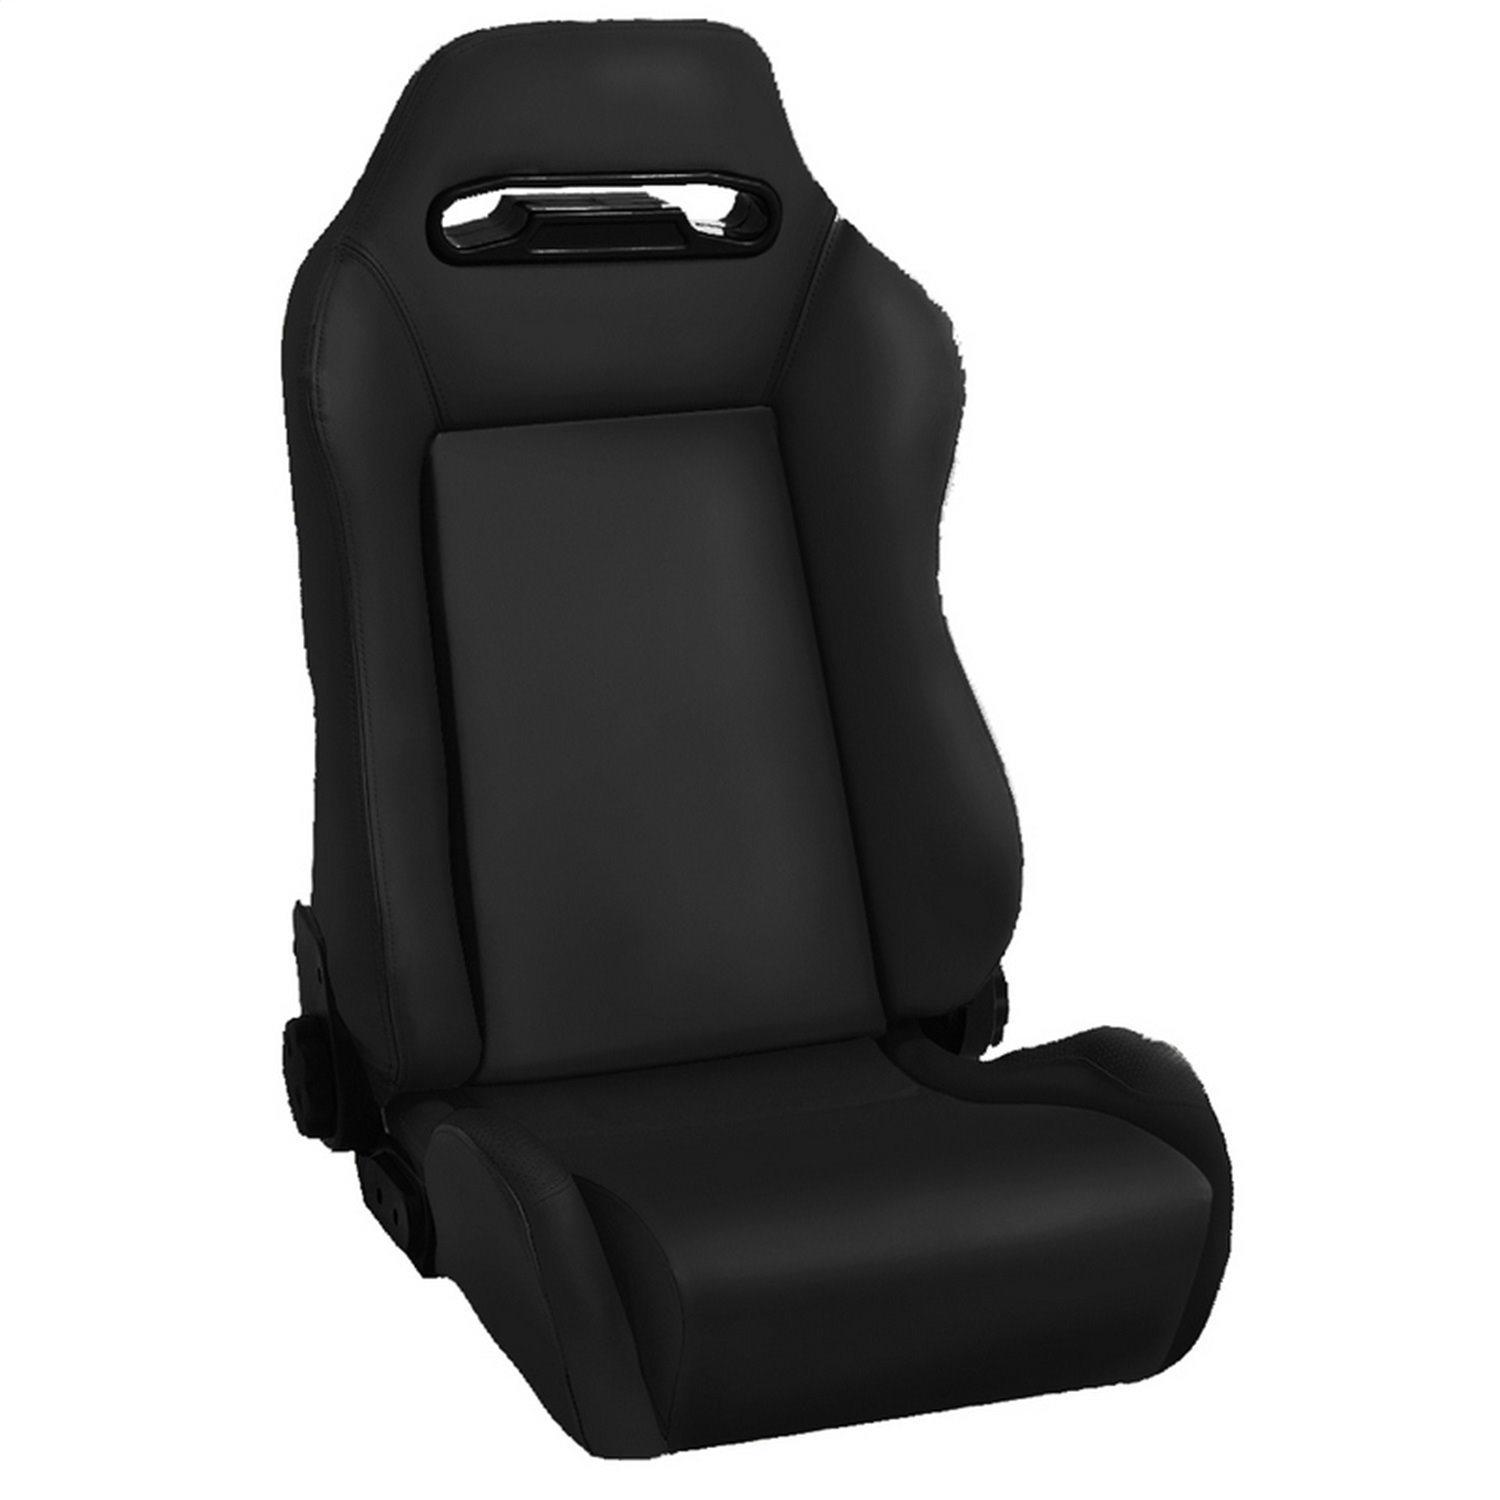 Reclinable Sport Seat for 1976-2002 Jeep CJ/ Wrangler